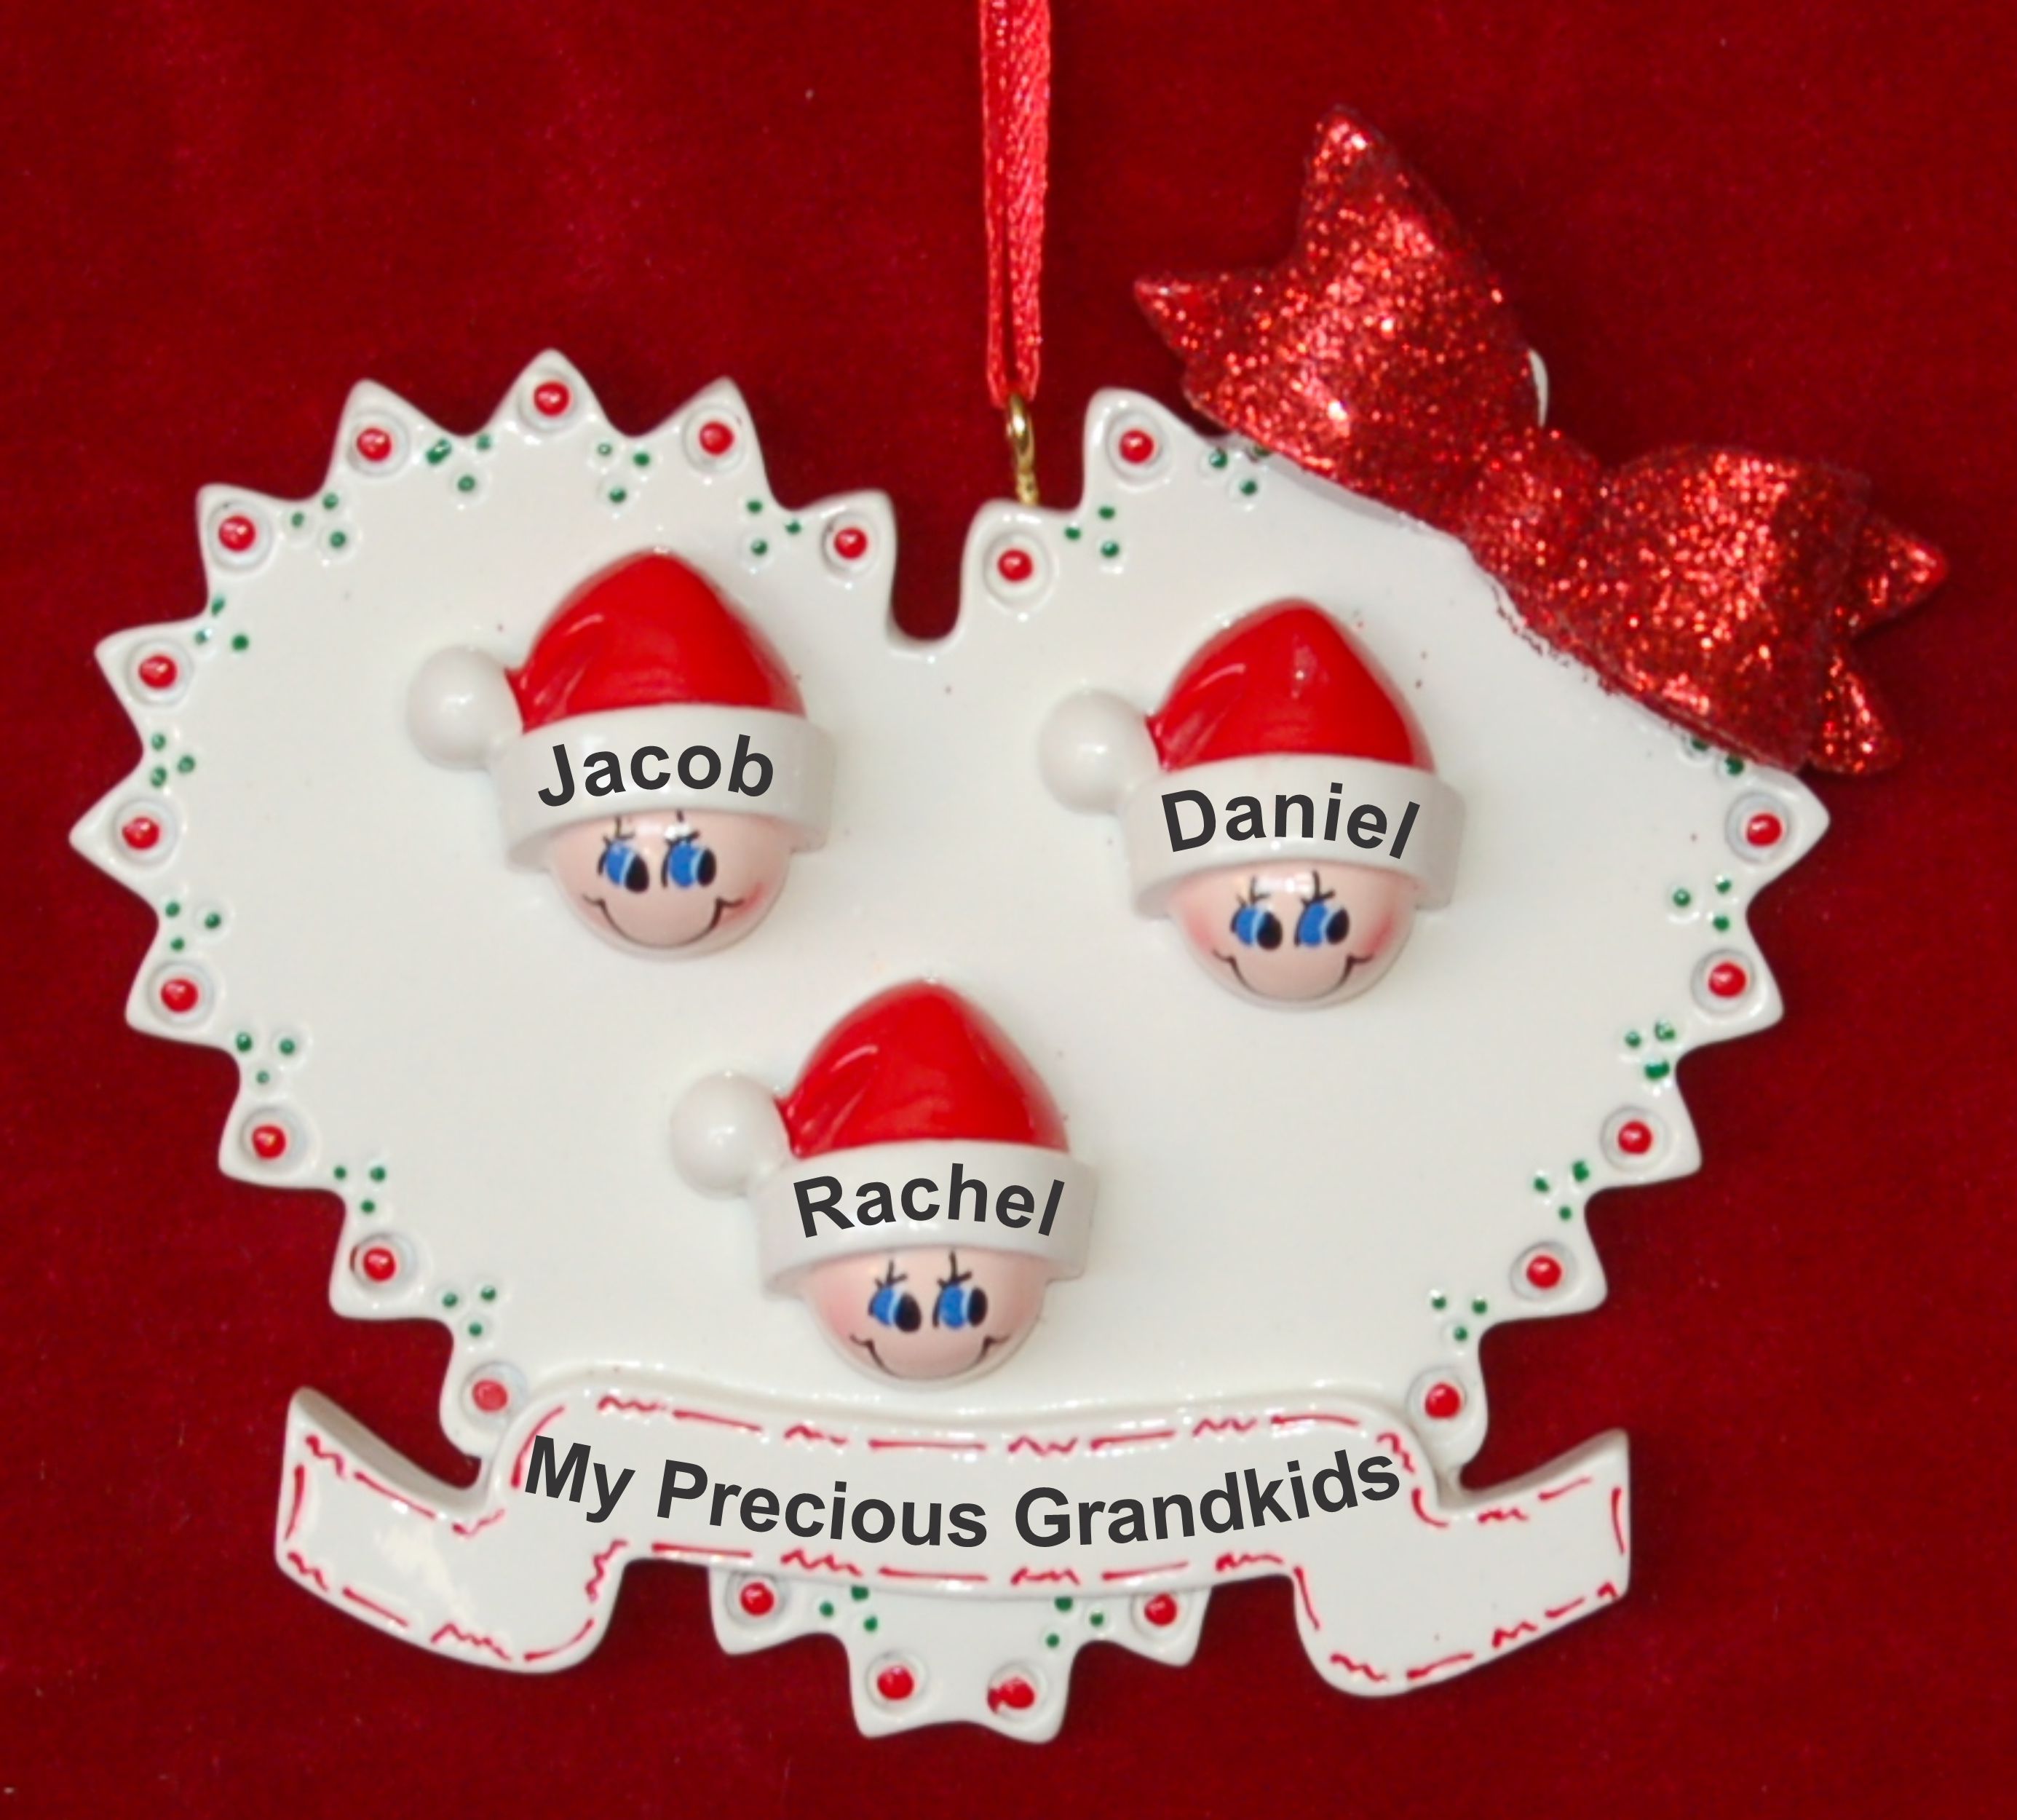 Grandparents Christmas Ornament Quilt of Love 3 Grandkids Personalized by RussellRhodes.com